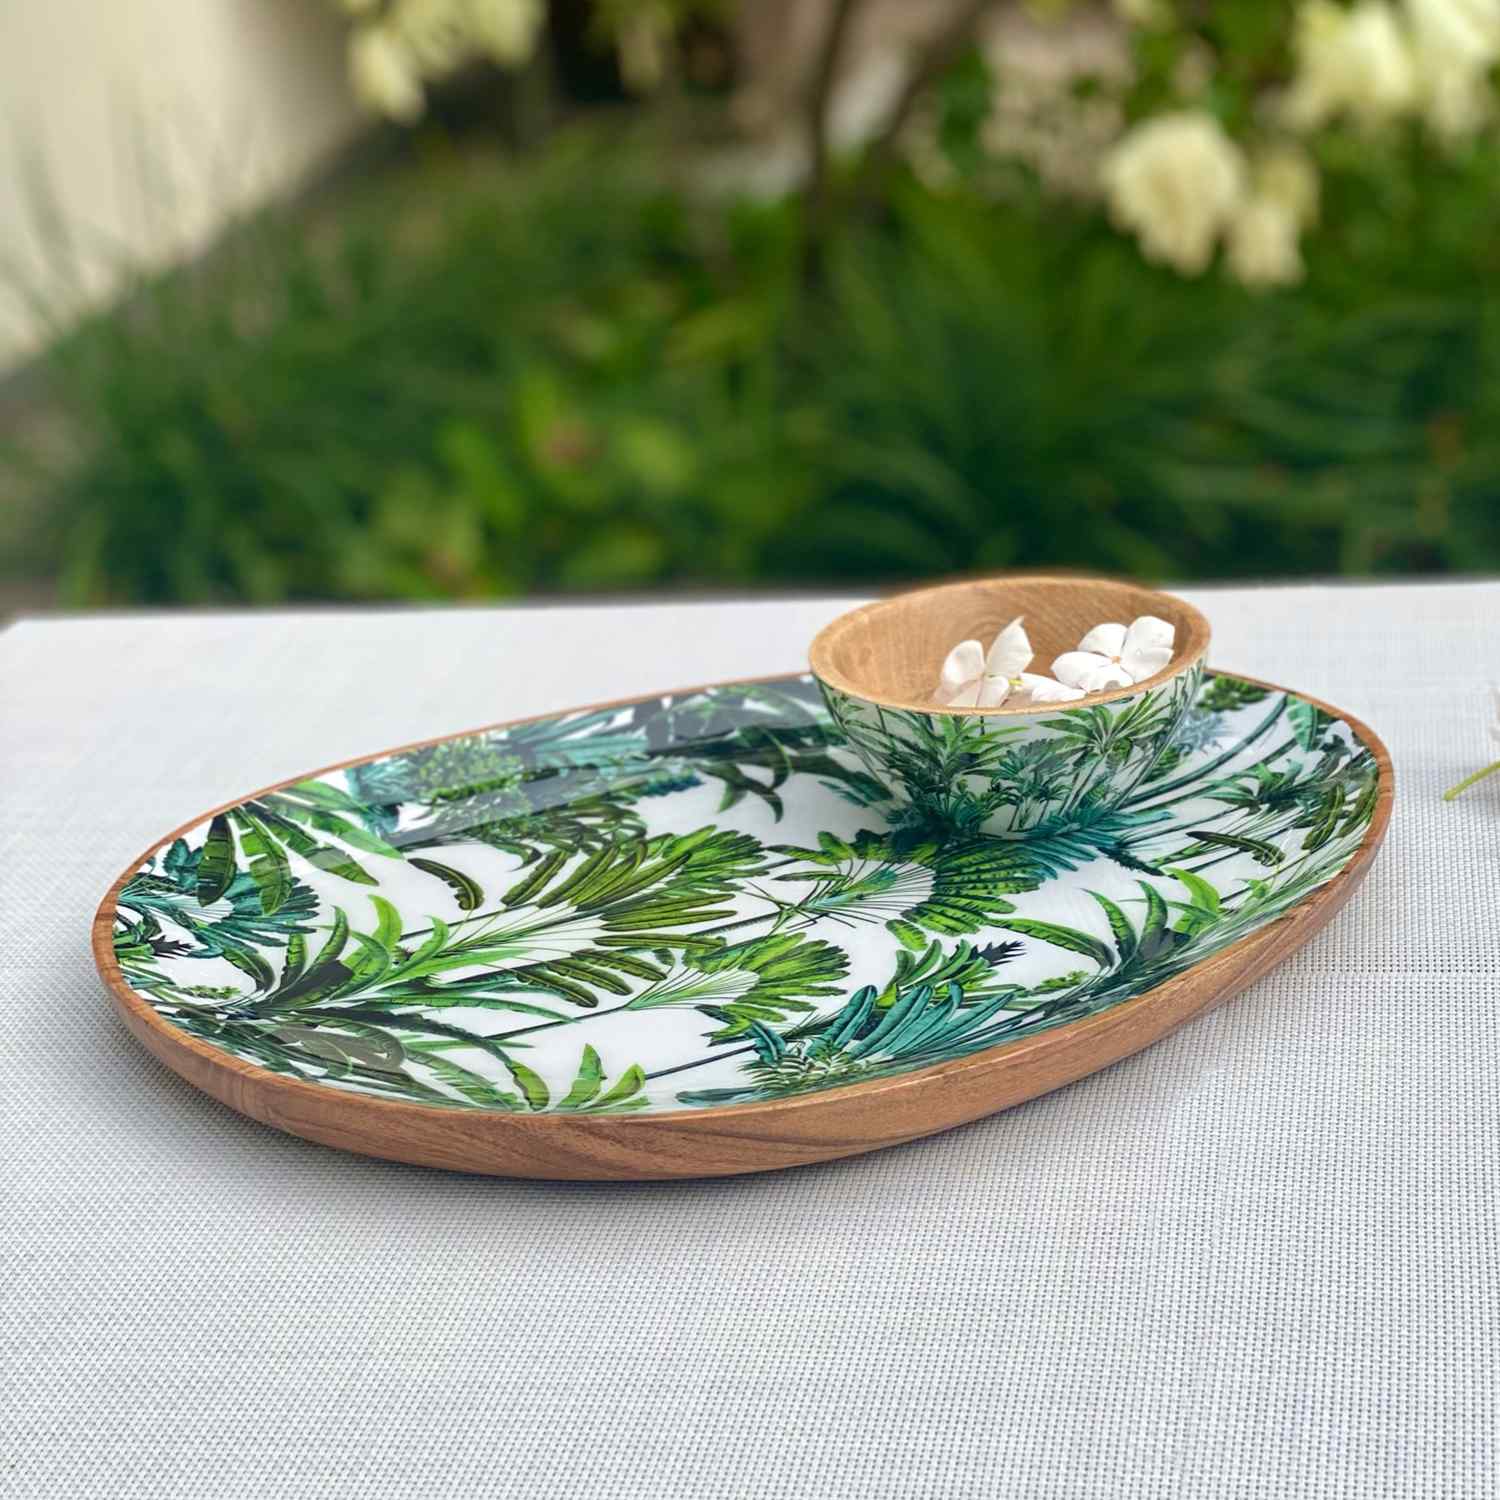 Large Oval Platter With Dip Bowl - Amazonia Day